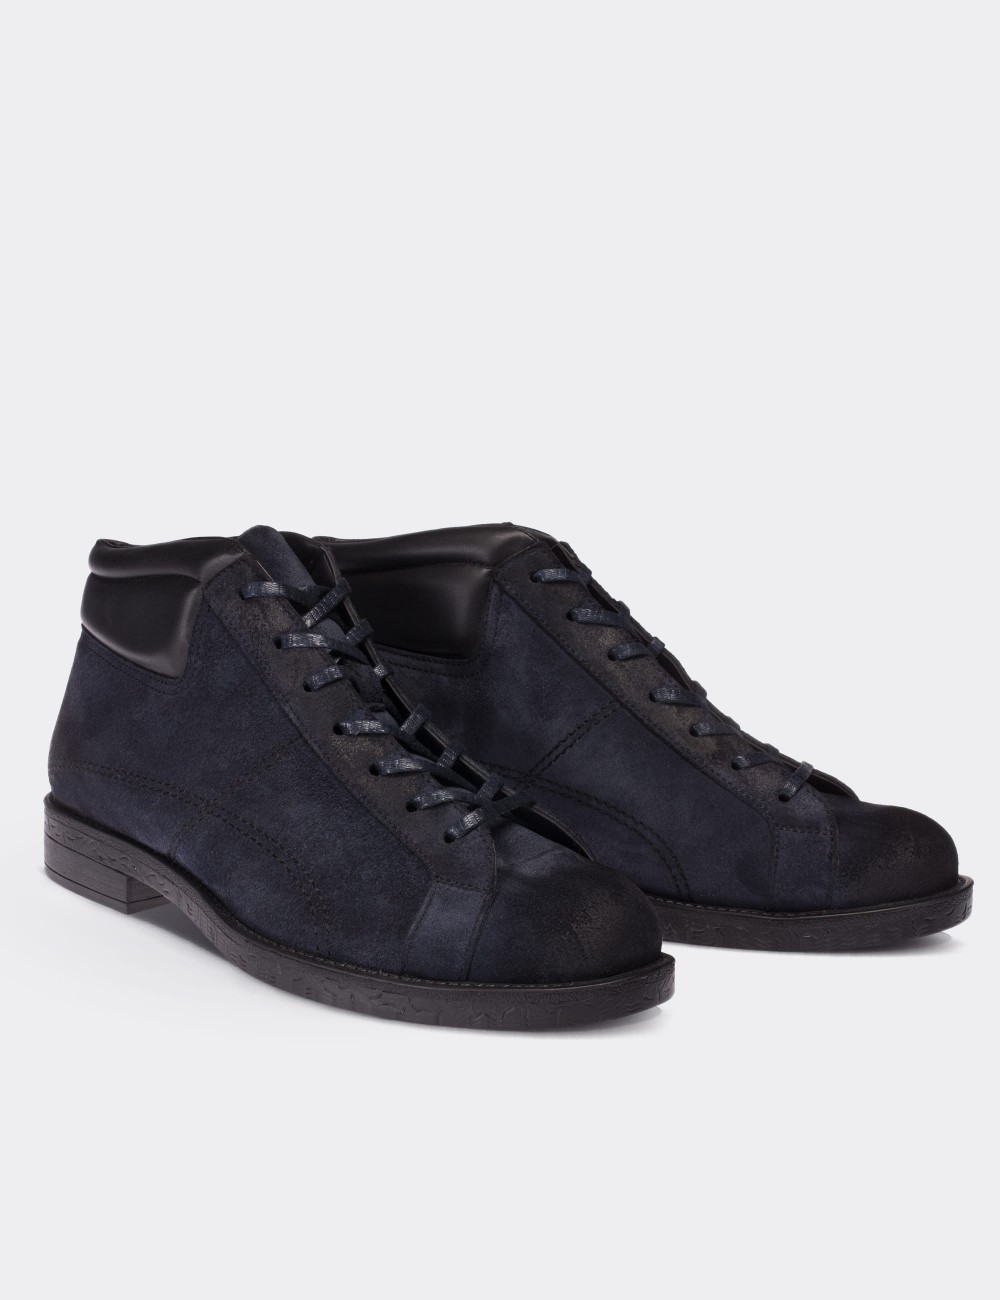 Navy Suede Leather Boots - 01760MLCVC03